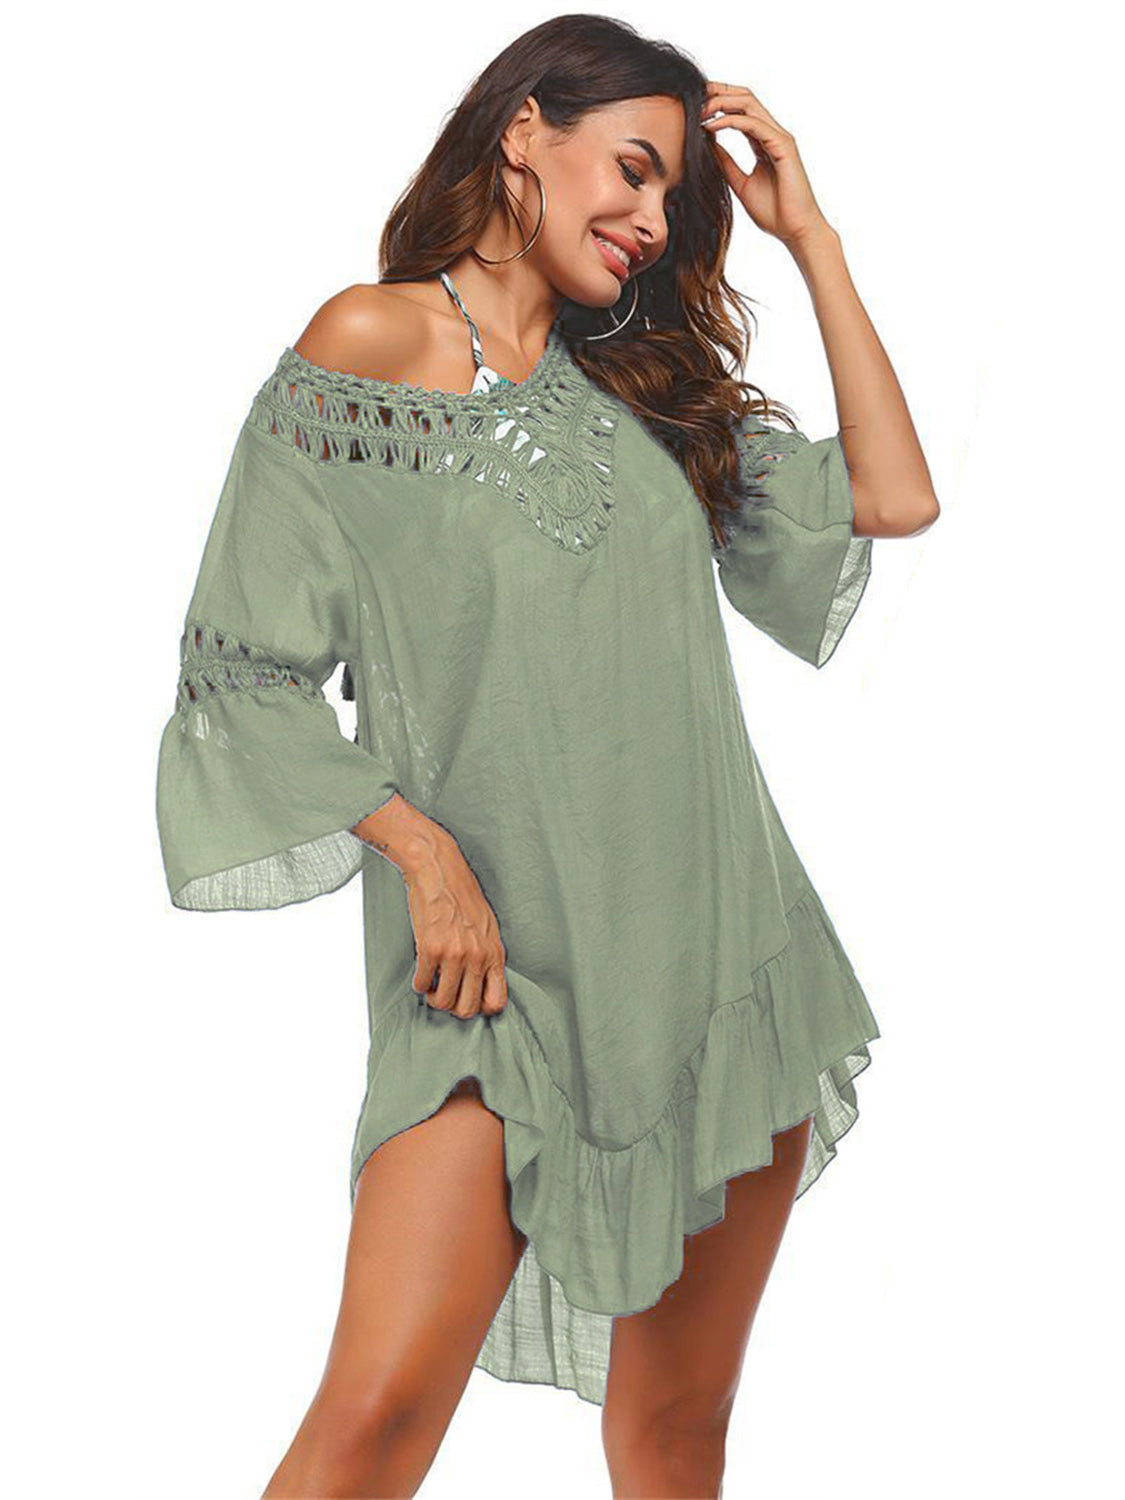 Sunset Vacation  Backless Cutout Three-Quarter Sleeve Cover Up  Sunset and Swim   